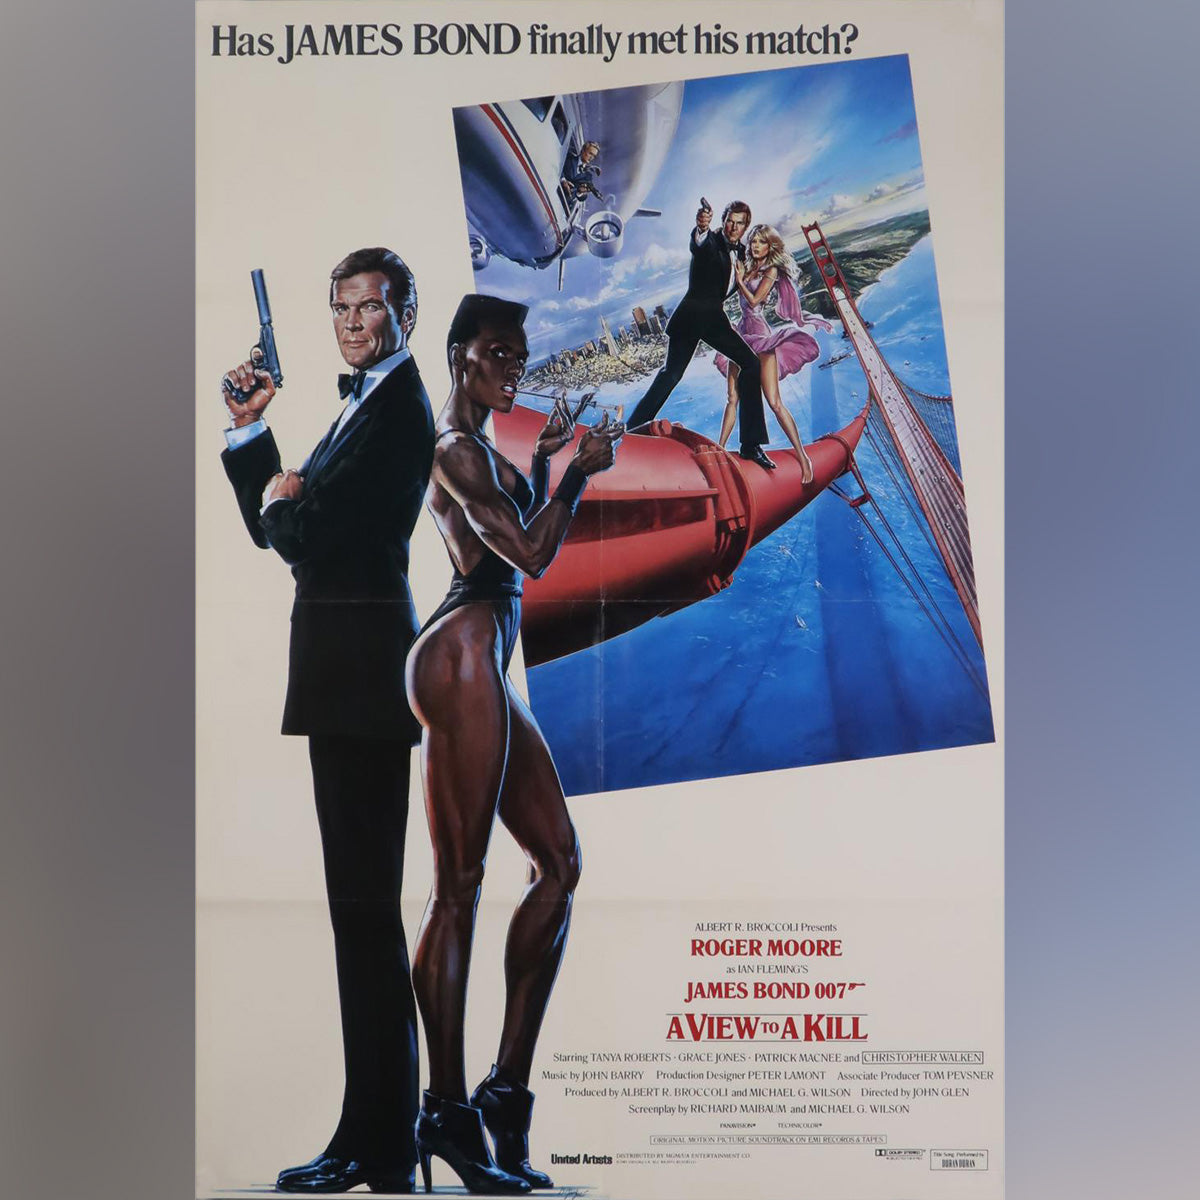 Original Movie Poster of A View To A Kill (1985)